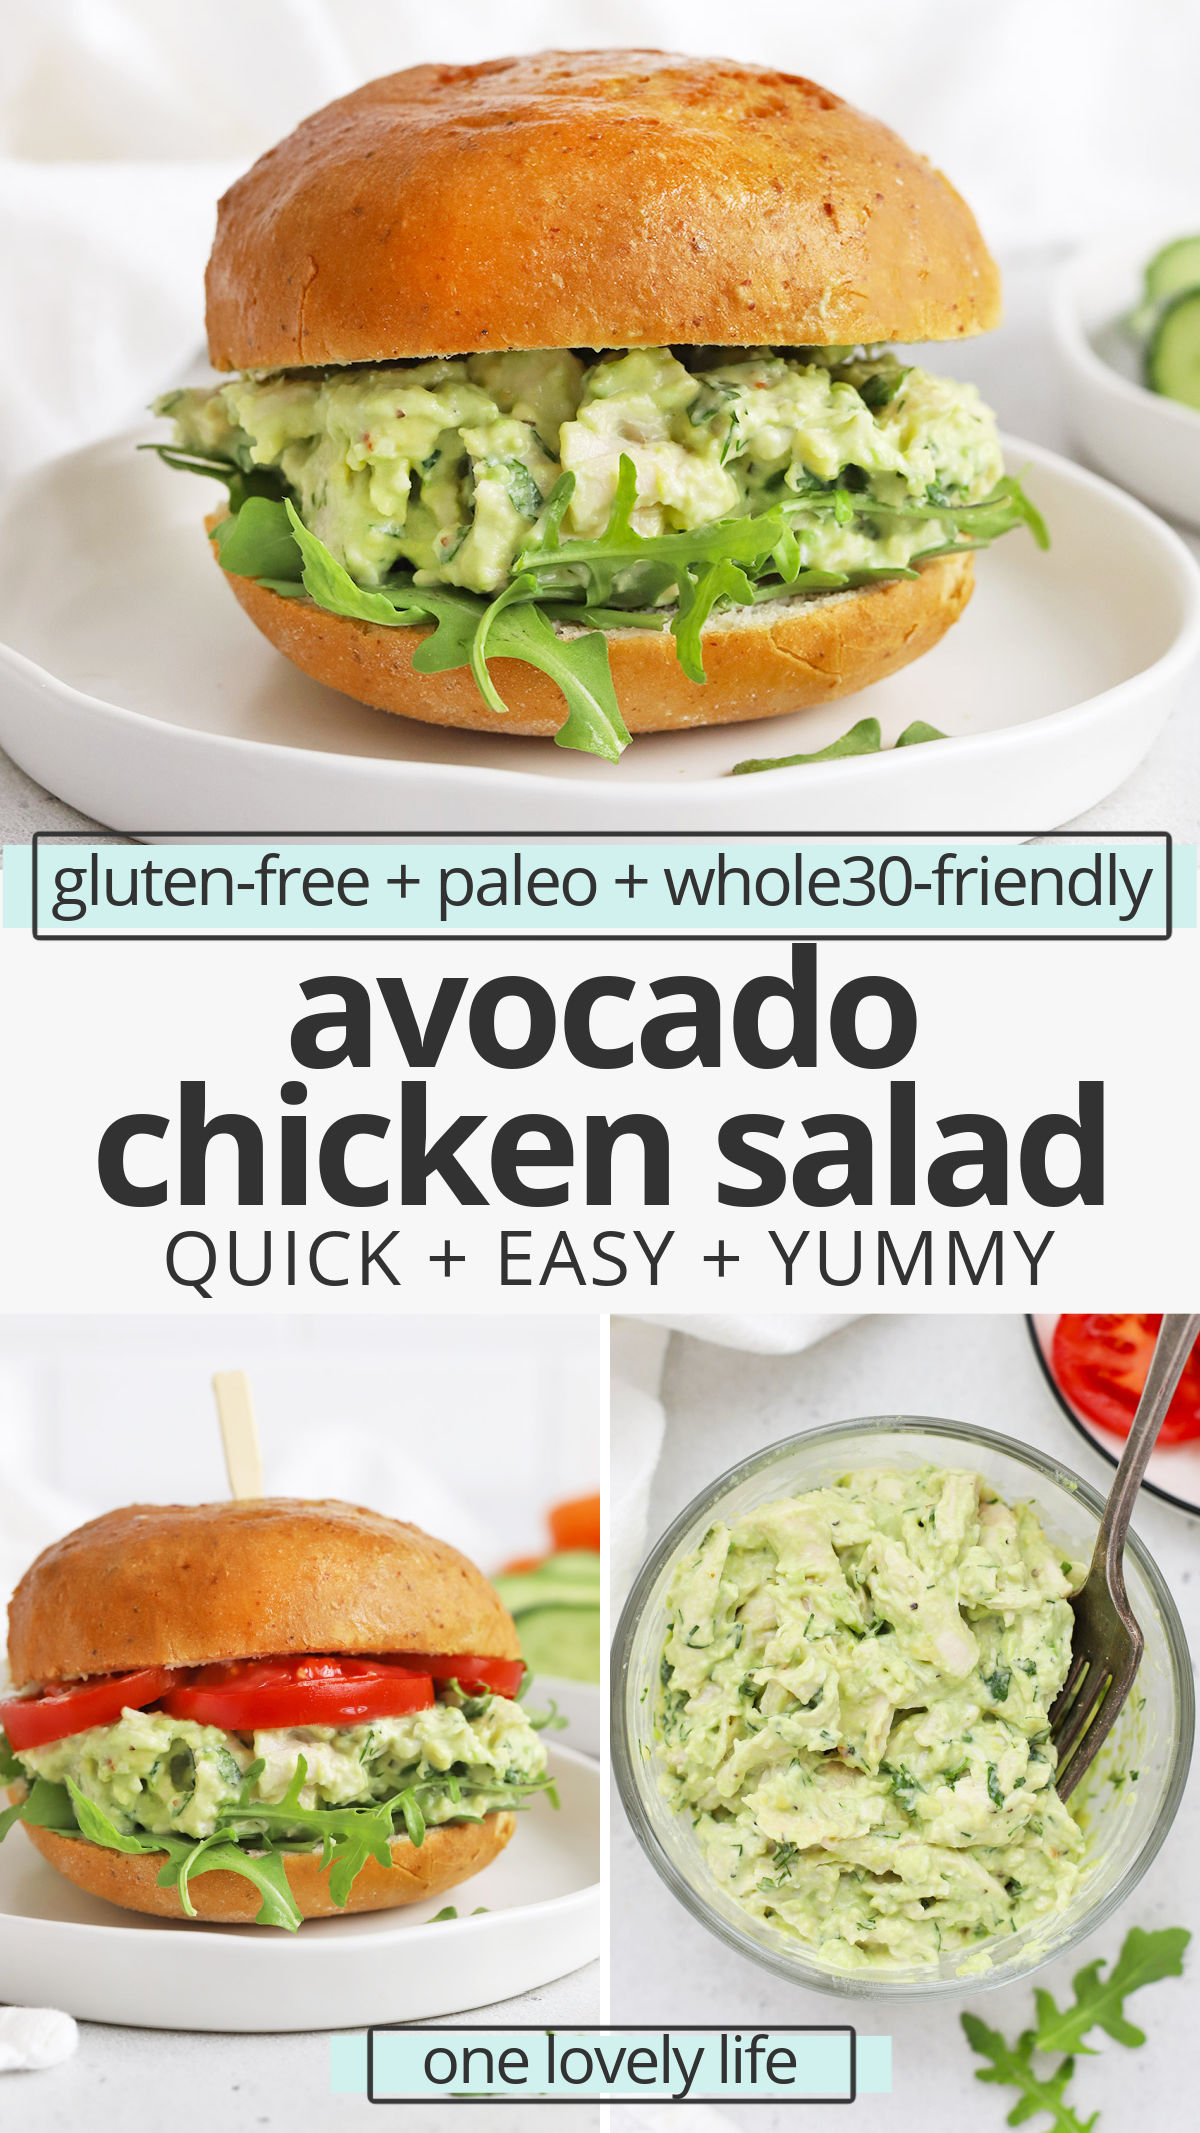 Avocado Chicken Salad - Tender chicken with creamy avocado sauce makes a delicious healthy lunch any day of the week! Try it on sandwiches, with crackers, in lettuce cups, and more! (Gluten-Free, Paleo, Whole30-Friendly) // Healthy Meal Prep Lunch // Whole30 Lunch // Paleo Lunch // Chicken Salad Recipe #glutenfree #mealprep #avocado #chickensalad #lunch #healthylunch